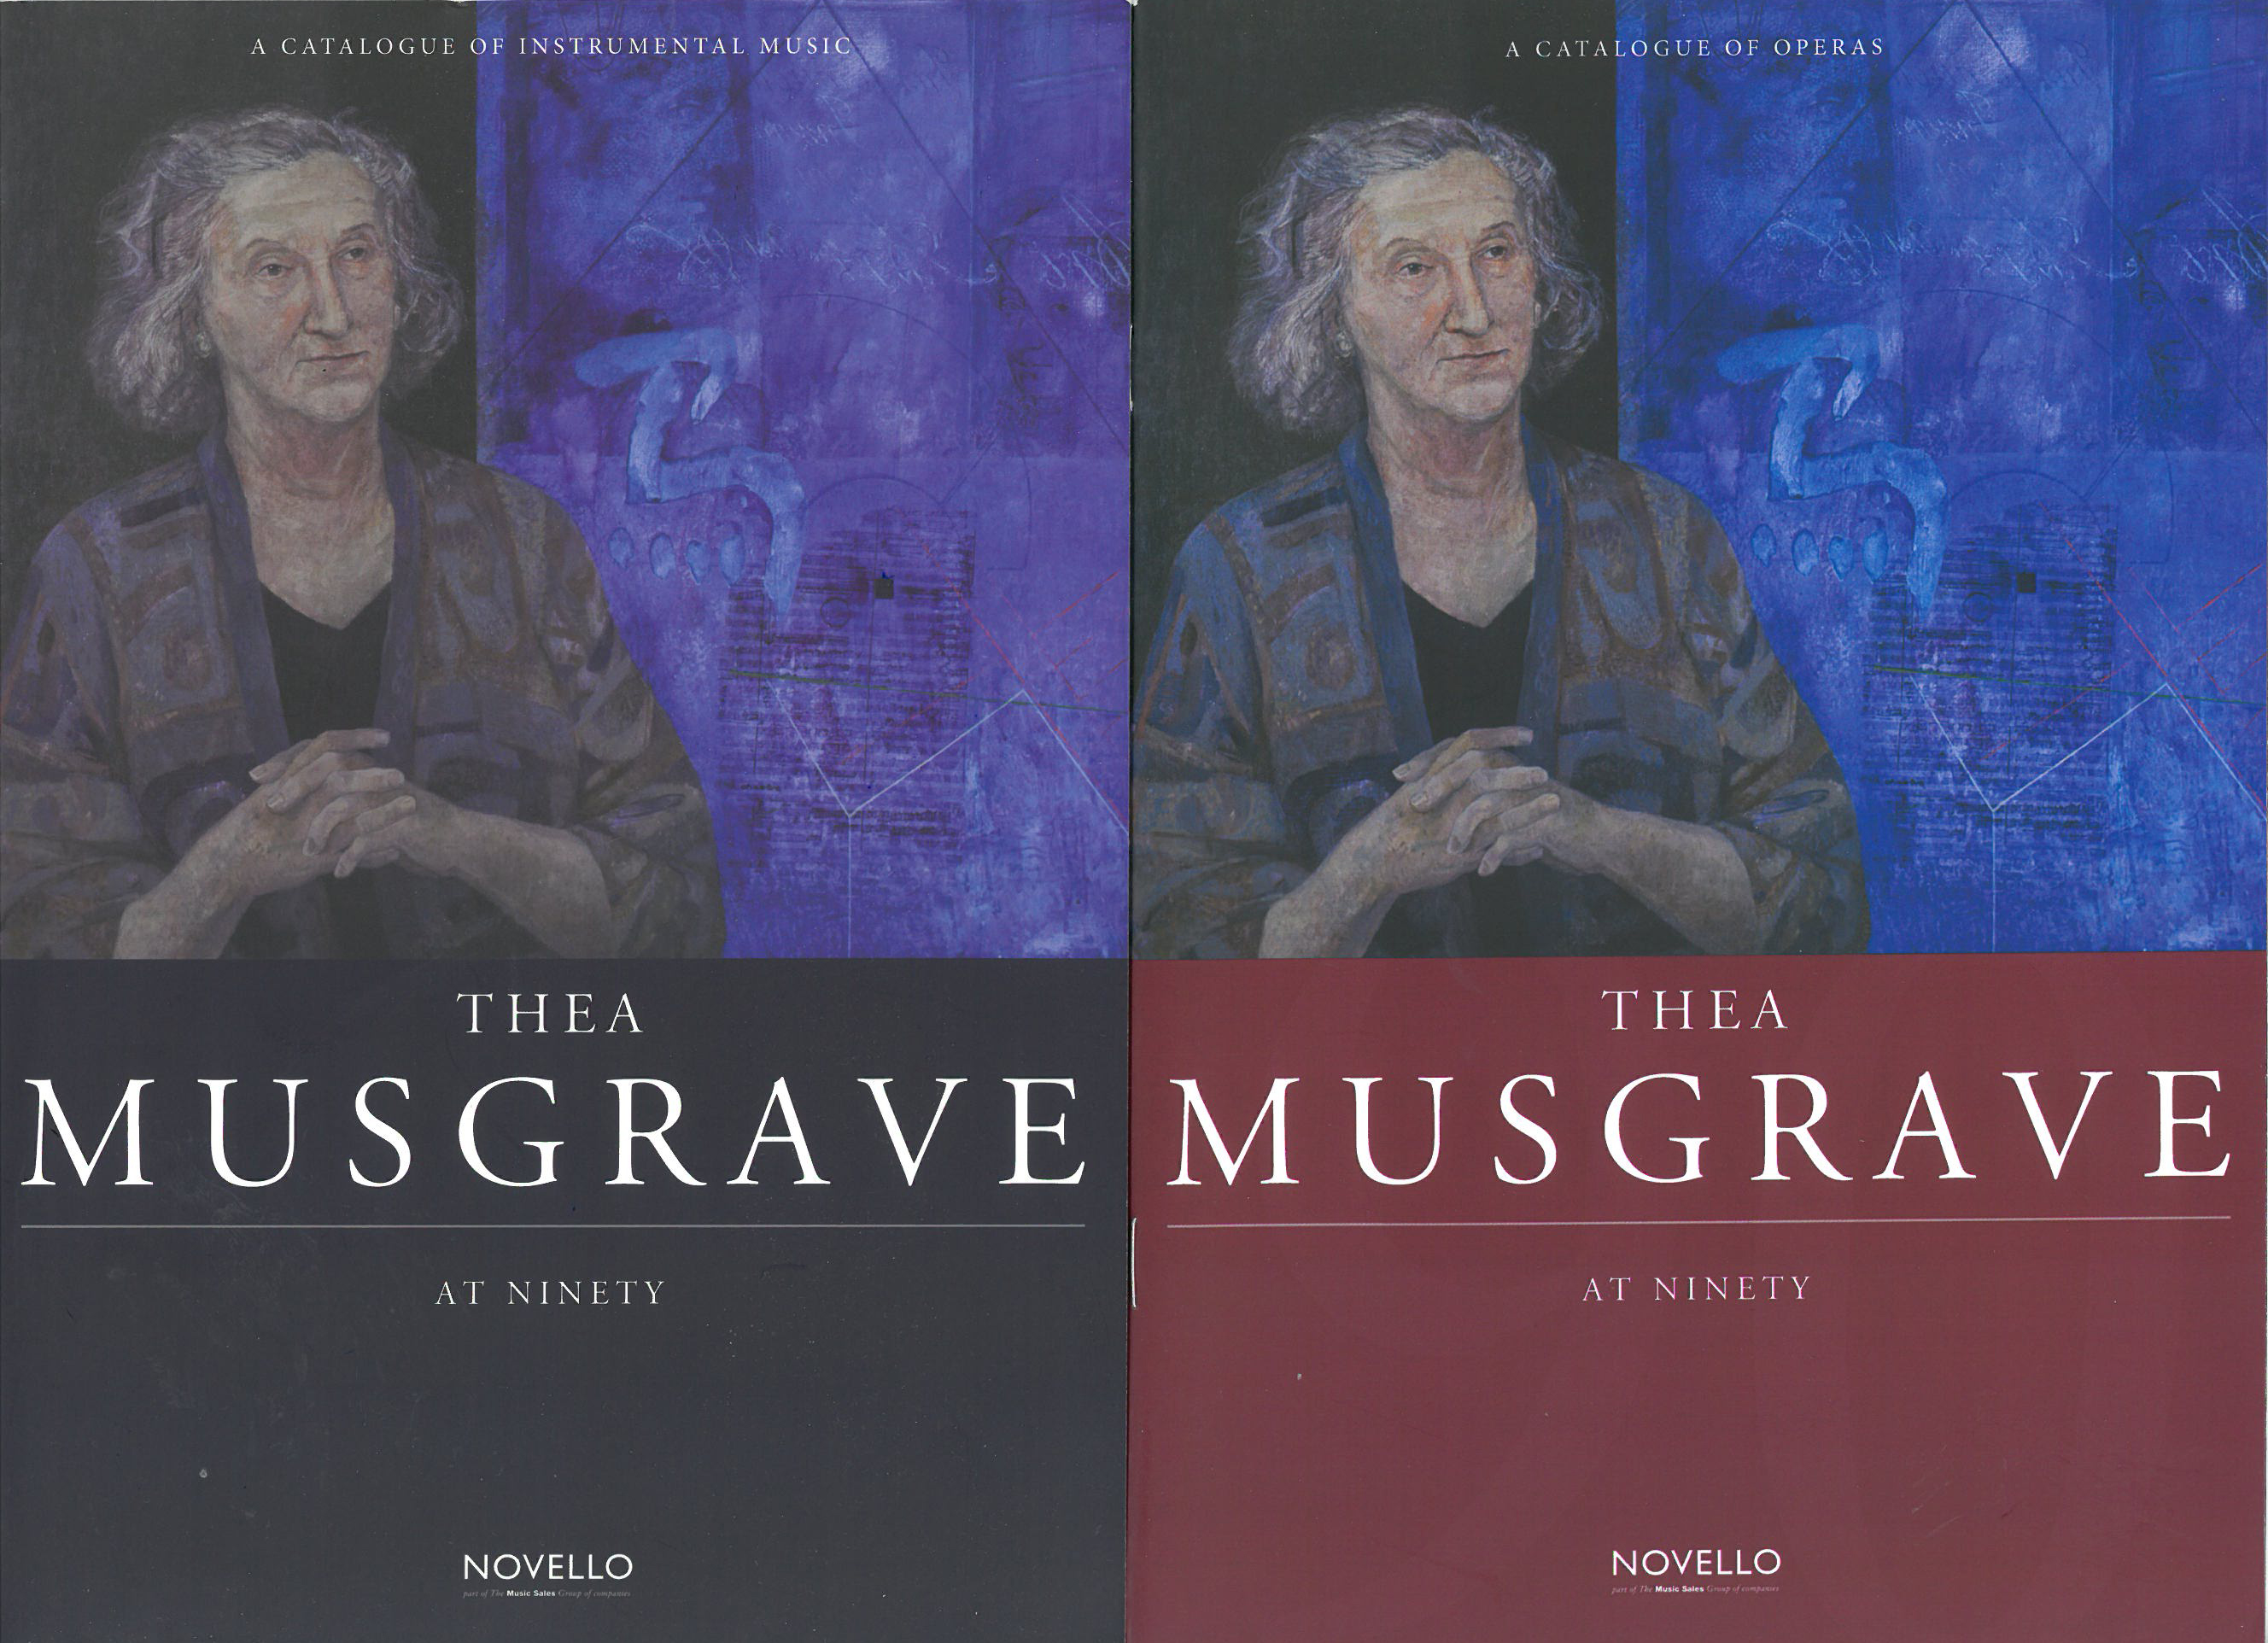 The covers for Novello's two Thea Musgrave at Ninety catalogs--one for instrumental works and one for operas.